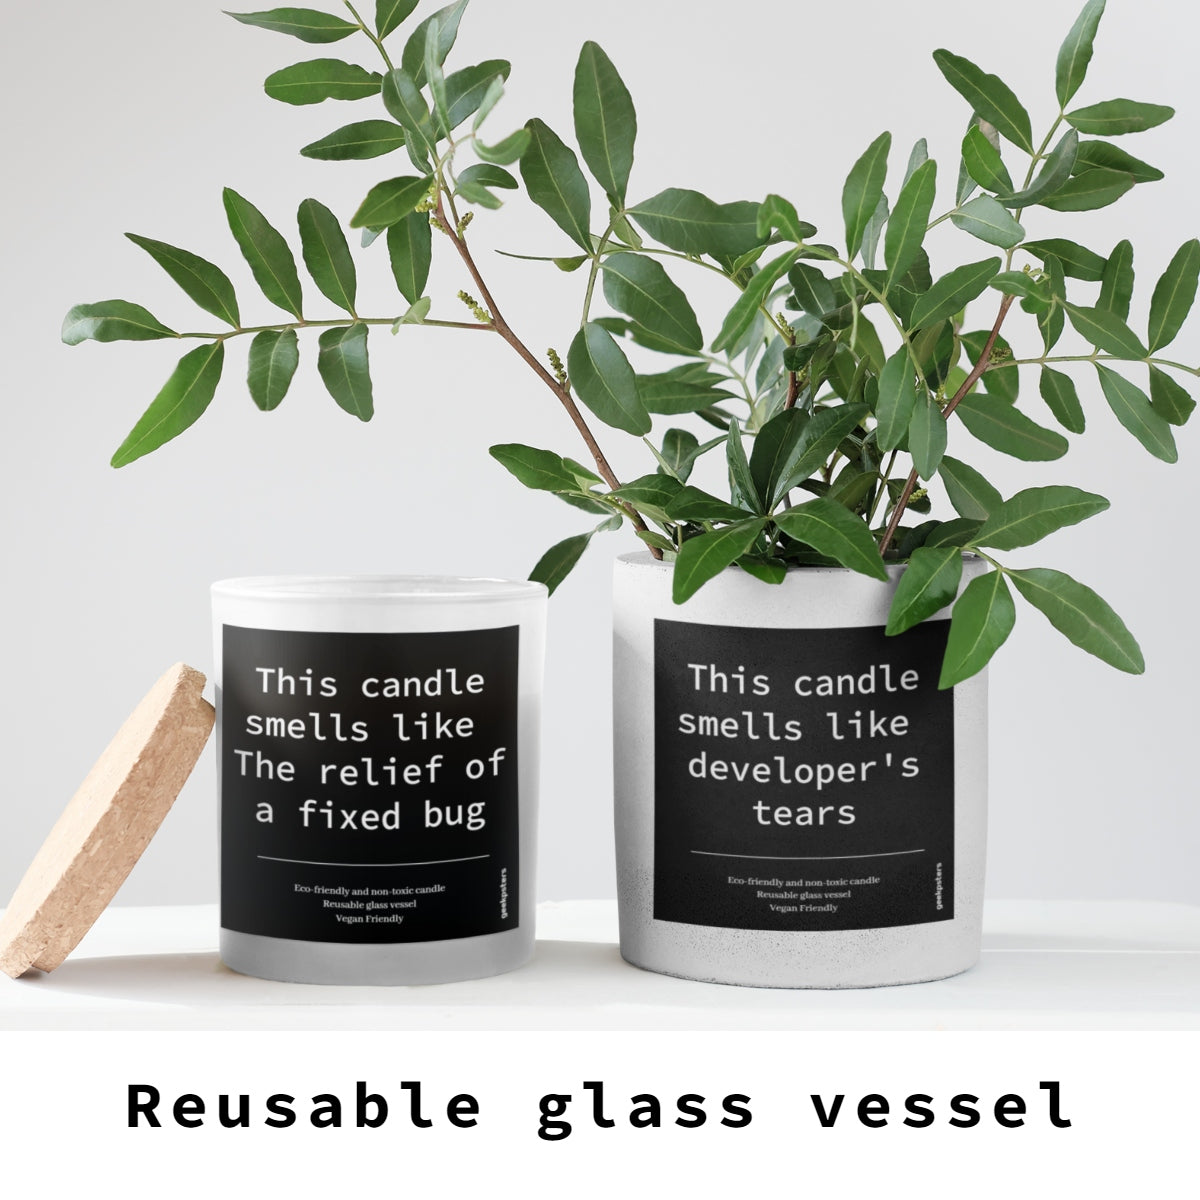 Two This Candle Smells Like a Weekend Without Alerts - Scented Soy Candles in reusable glass jars, labeled "the relief of a fixed bug" and "developer’s tears," beside a plant and matchstick.